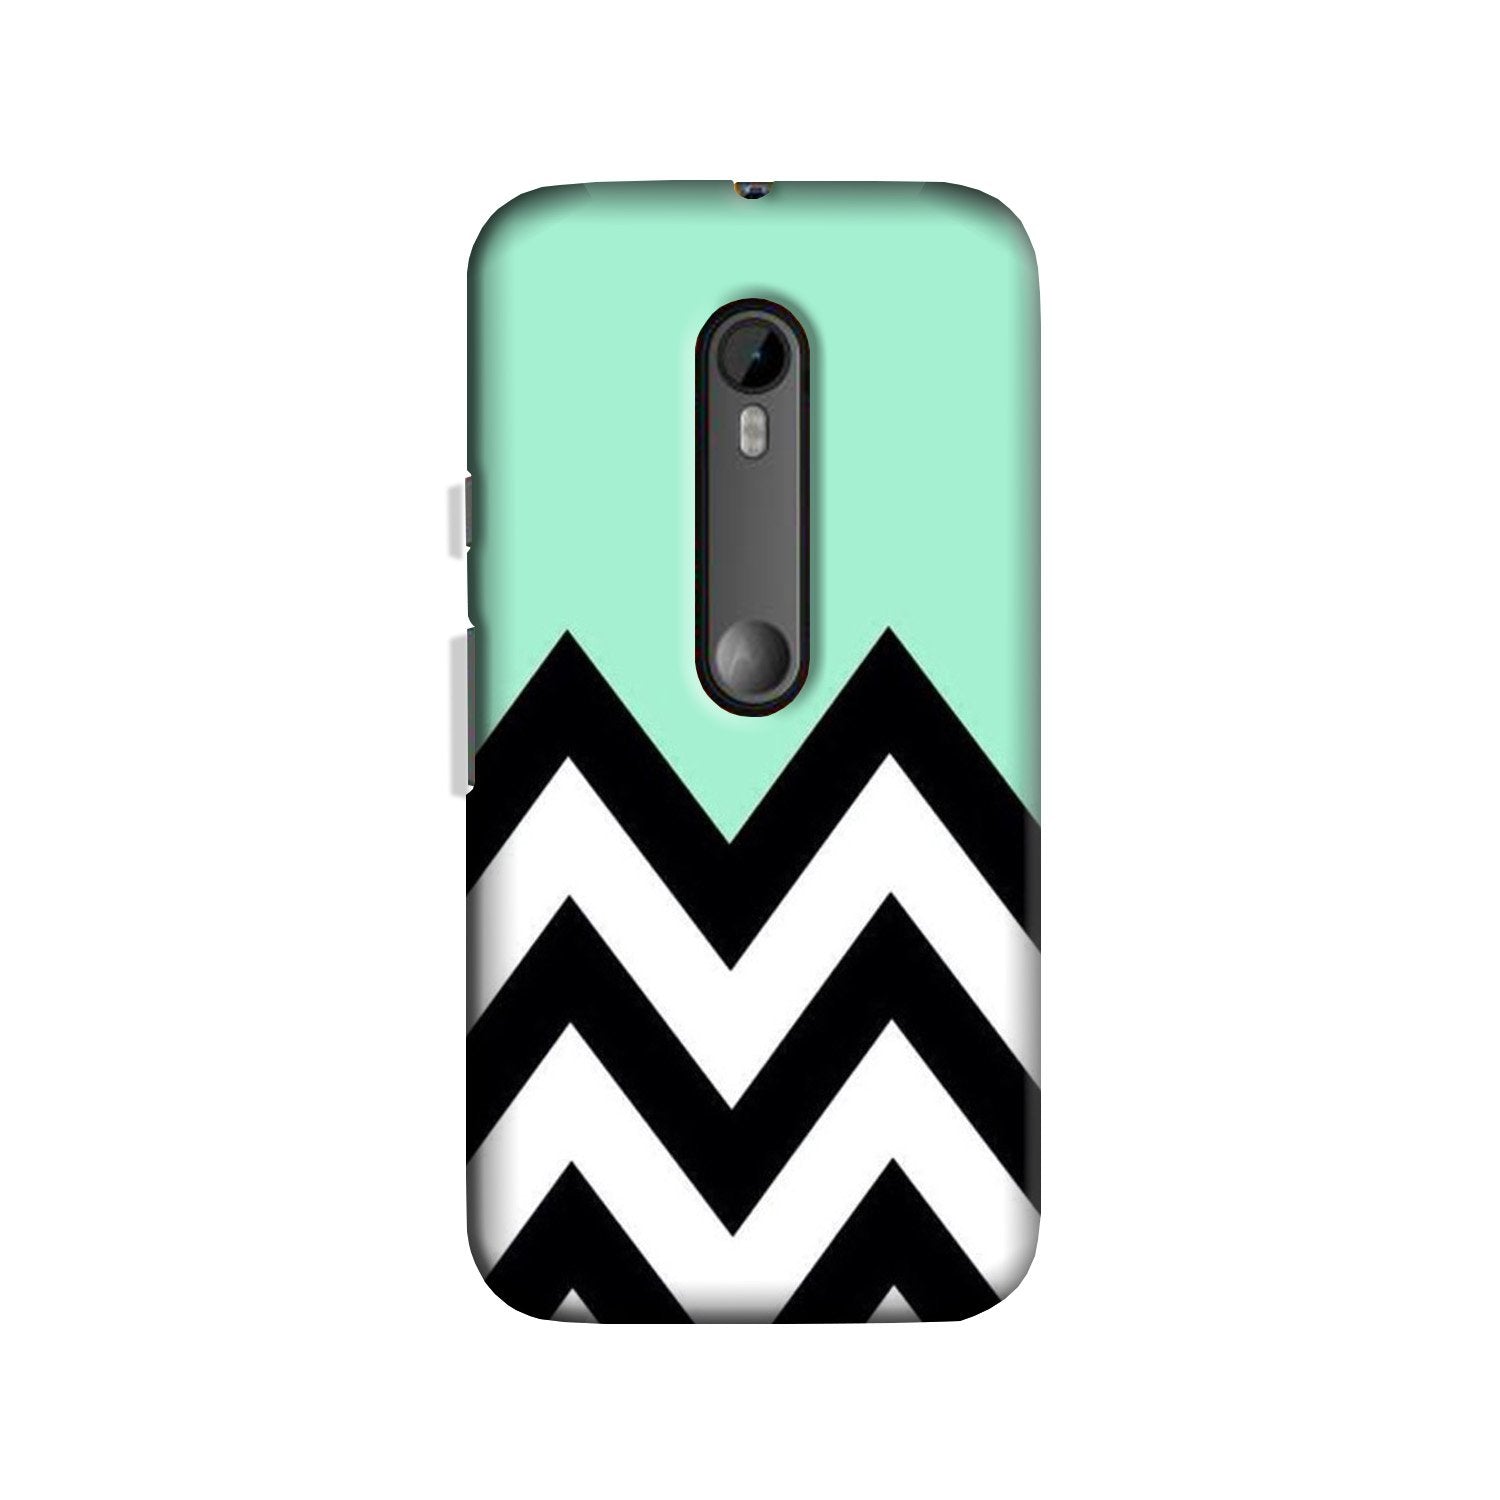 Pattern Case for Moto X Style